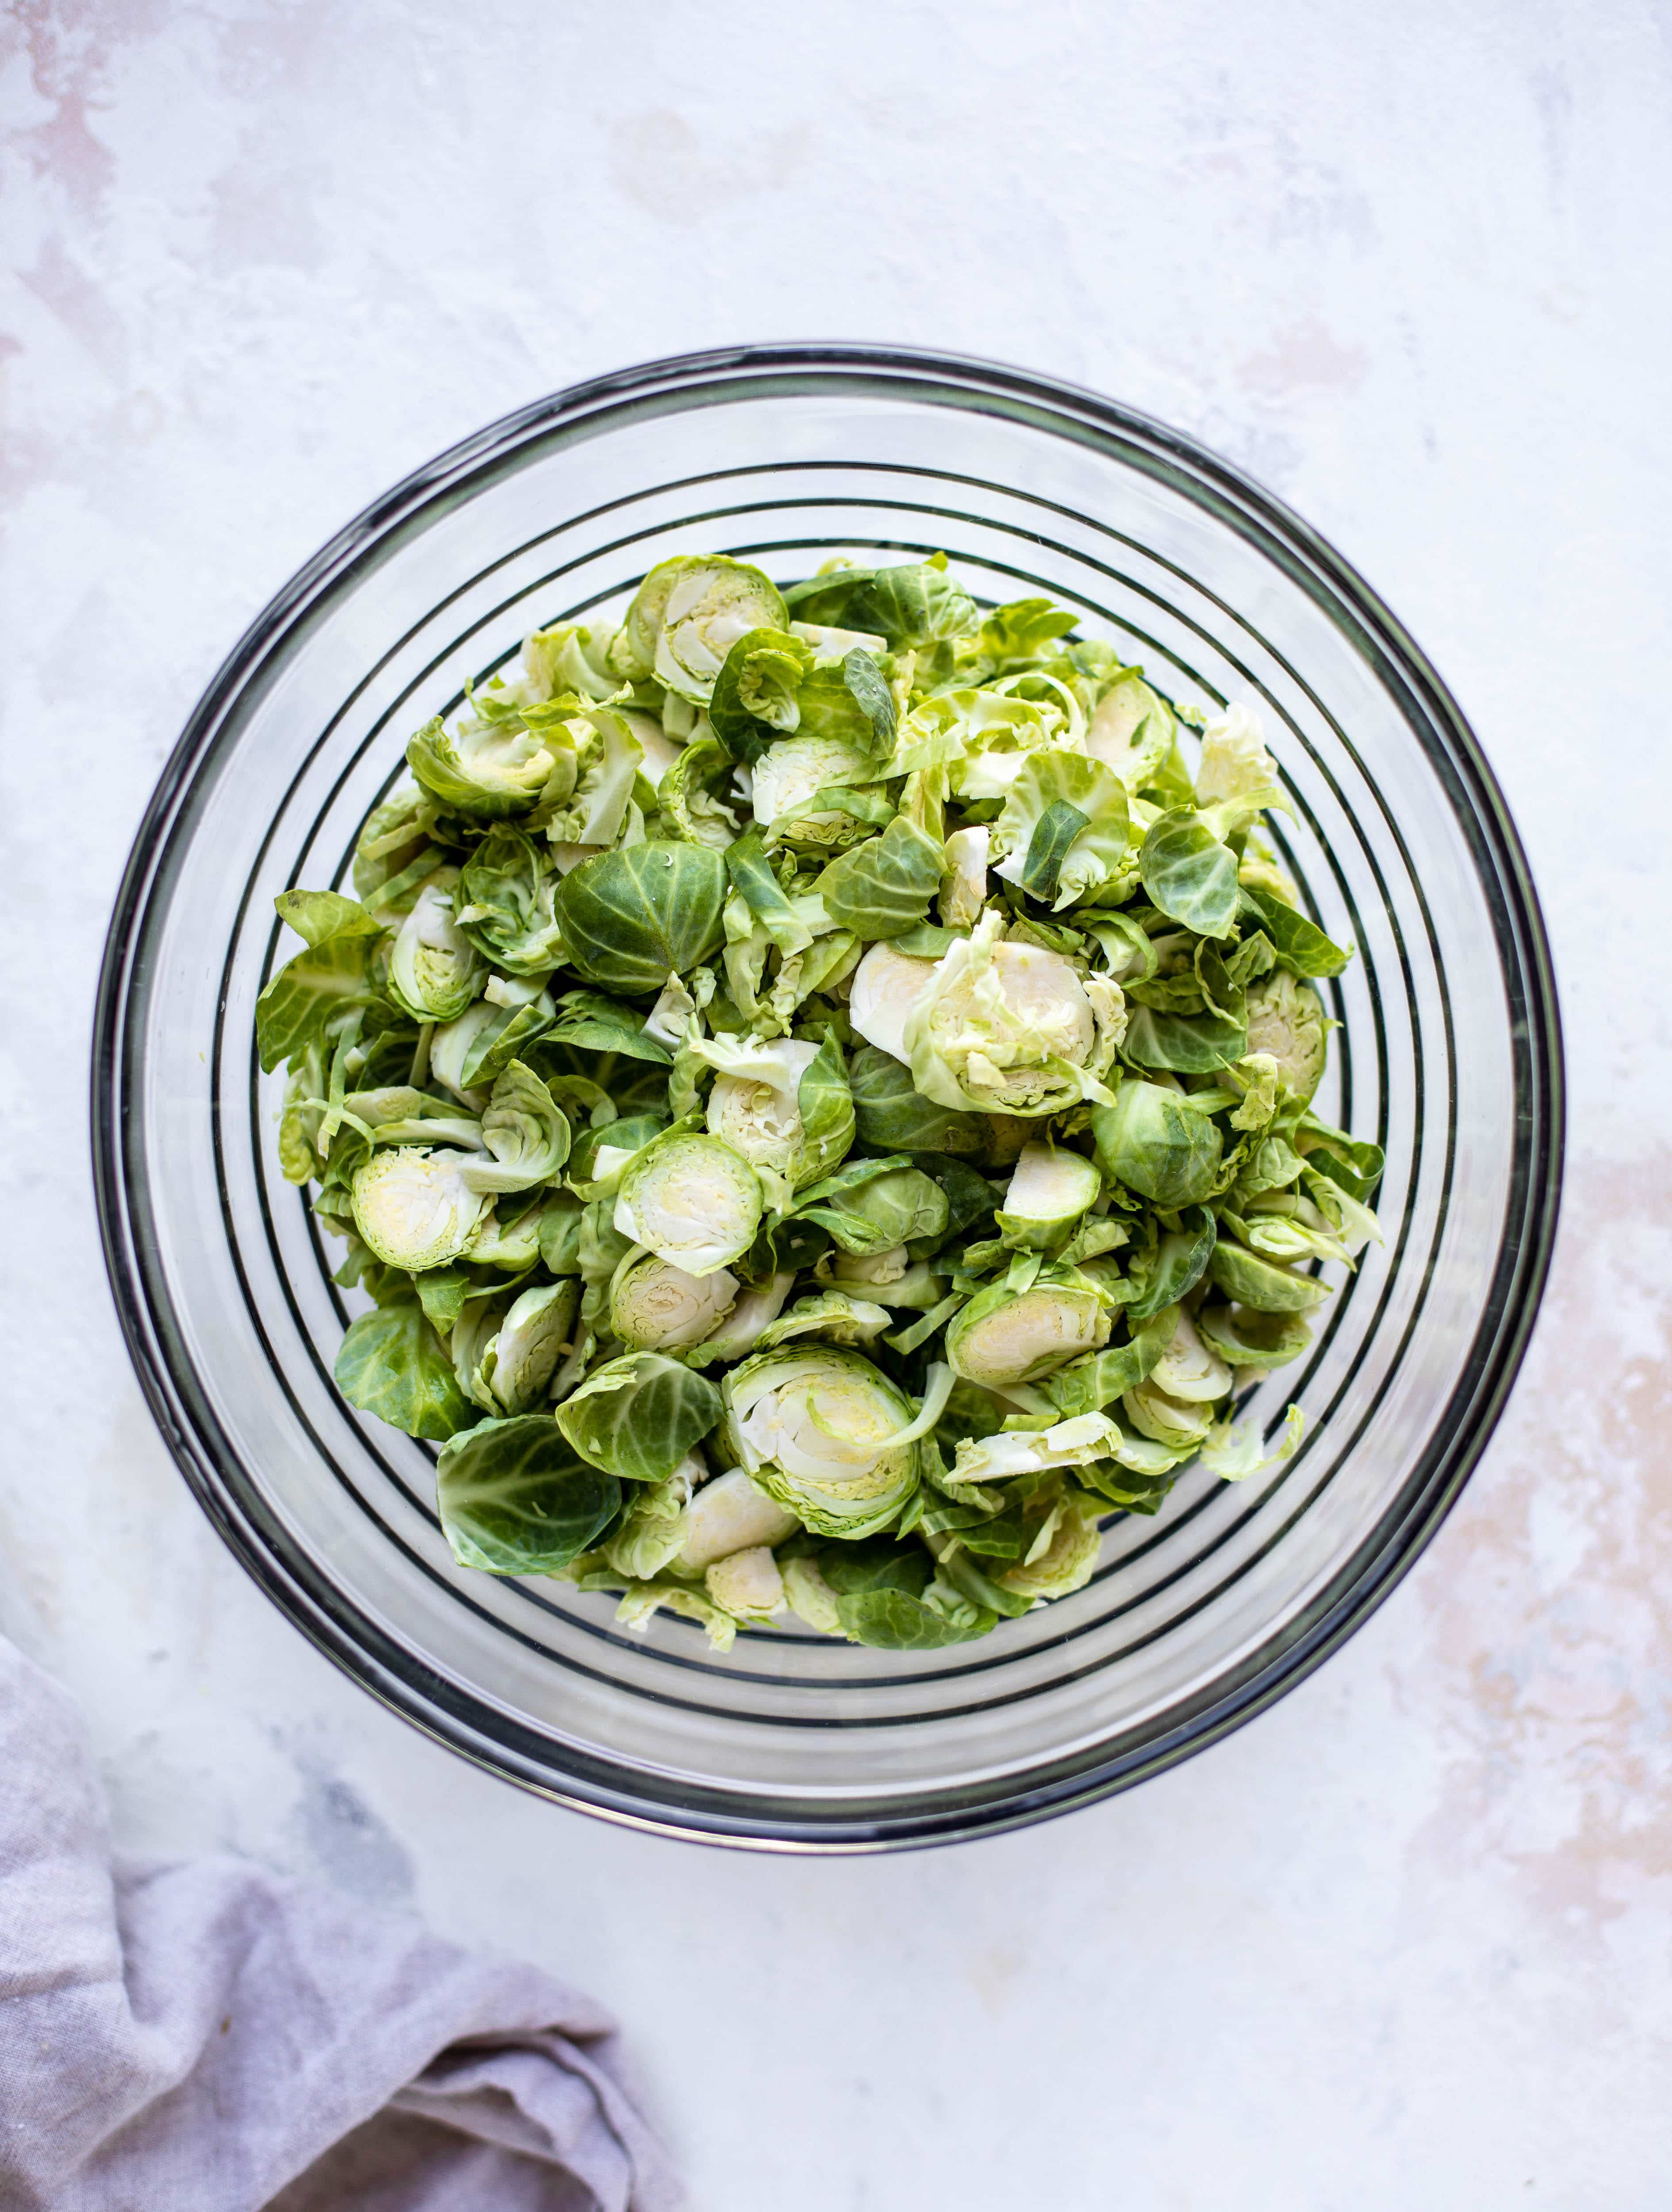 shredded brussels sprouts